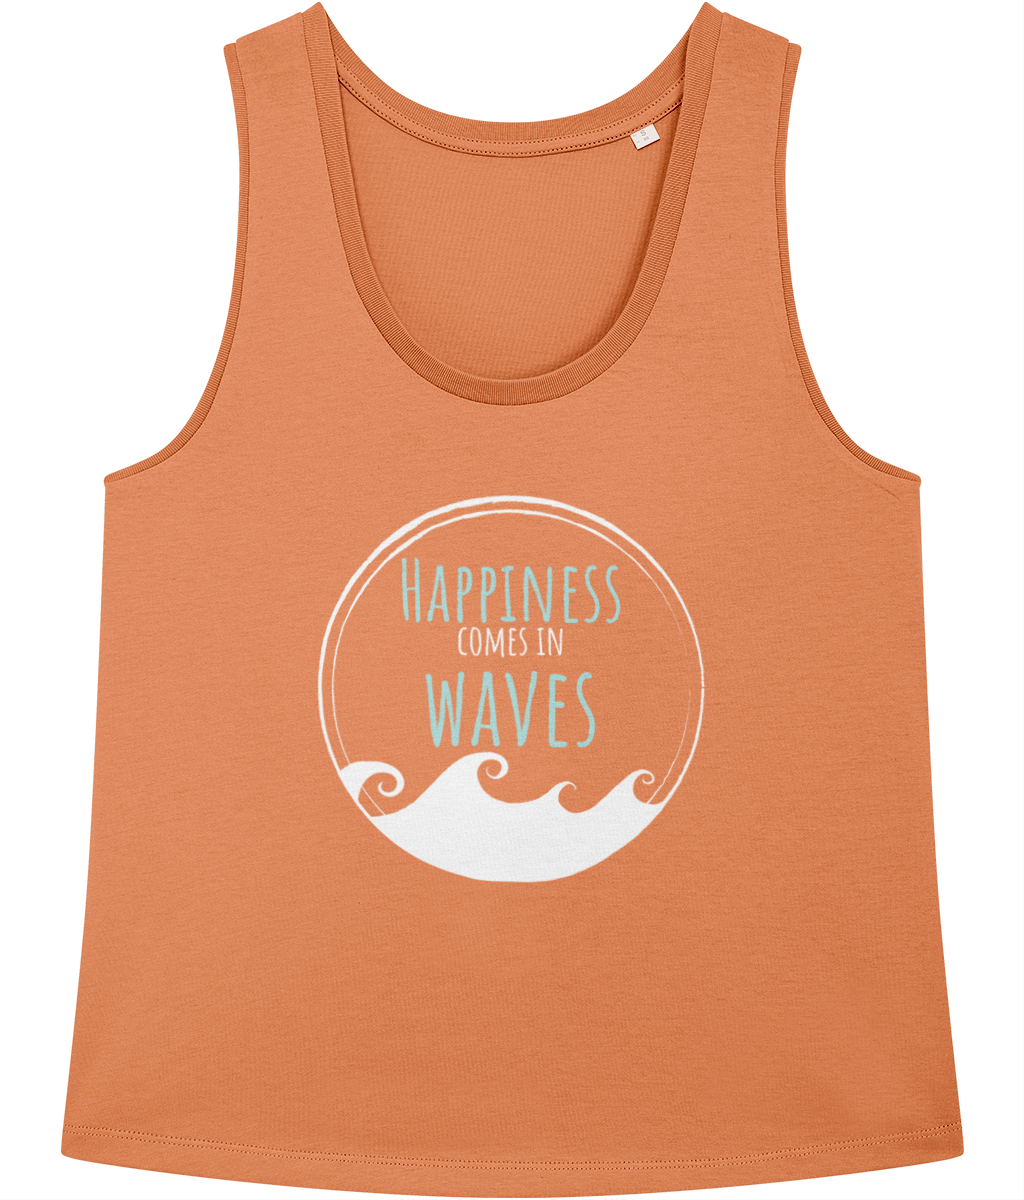 Happiness Comes in Waves 100% Organic Cotton Vest Top